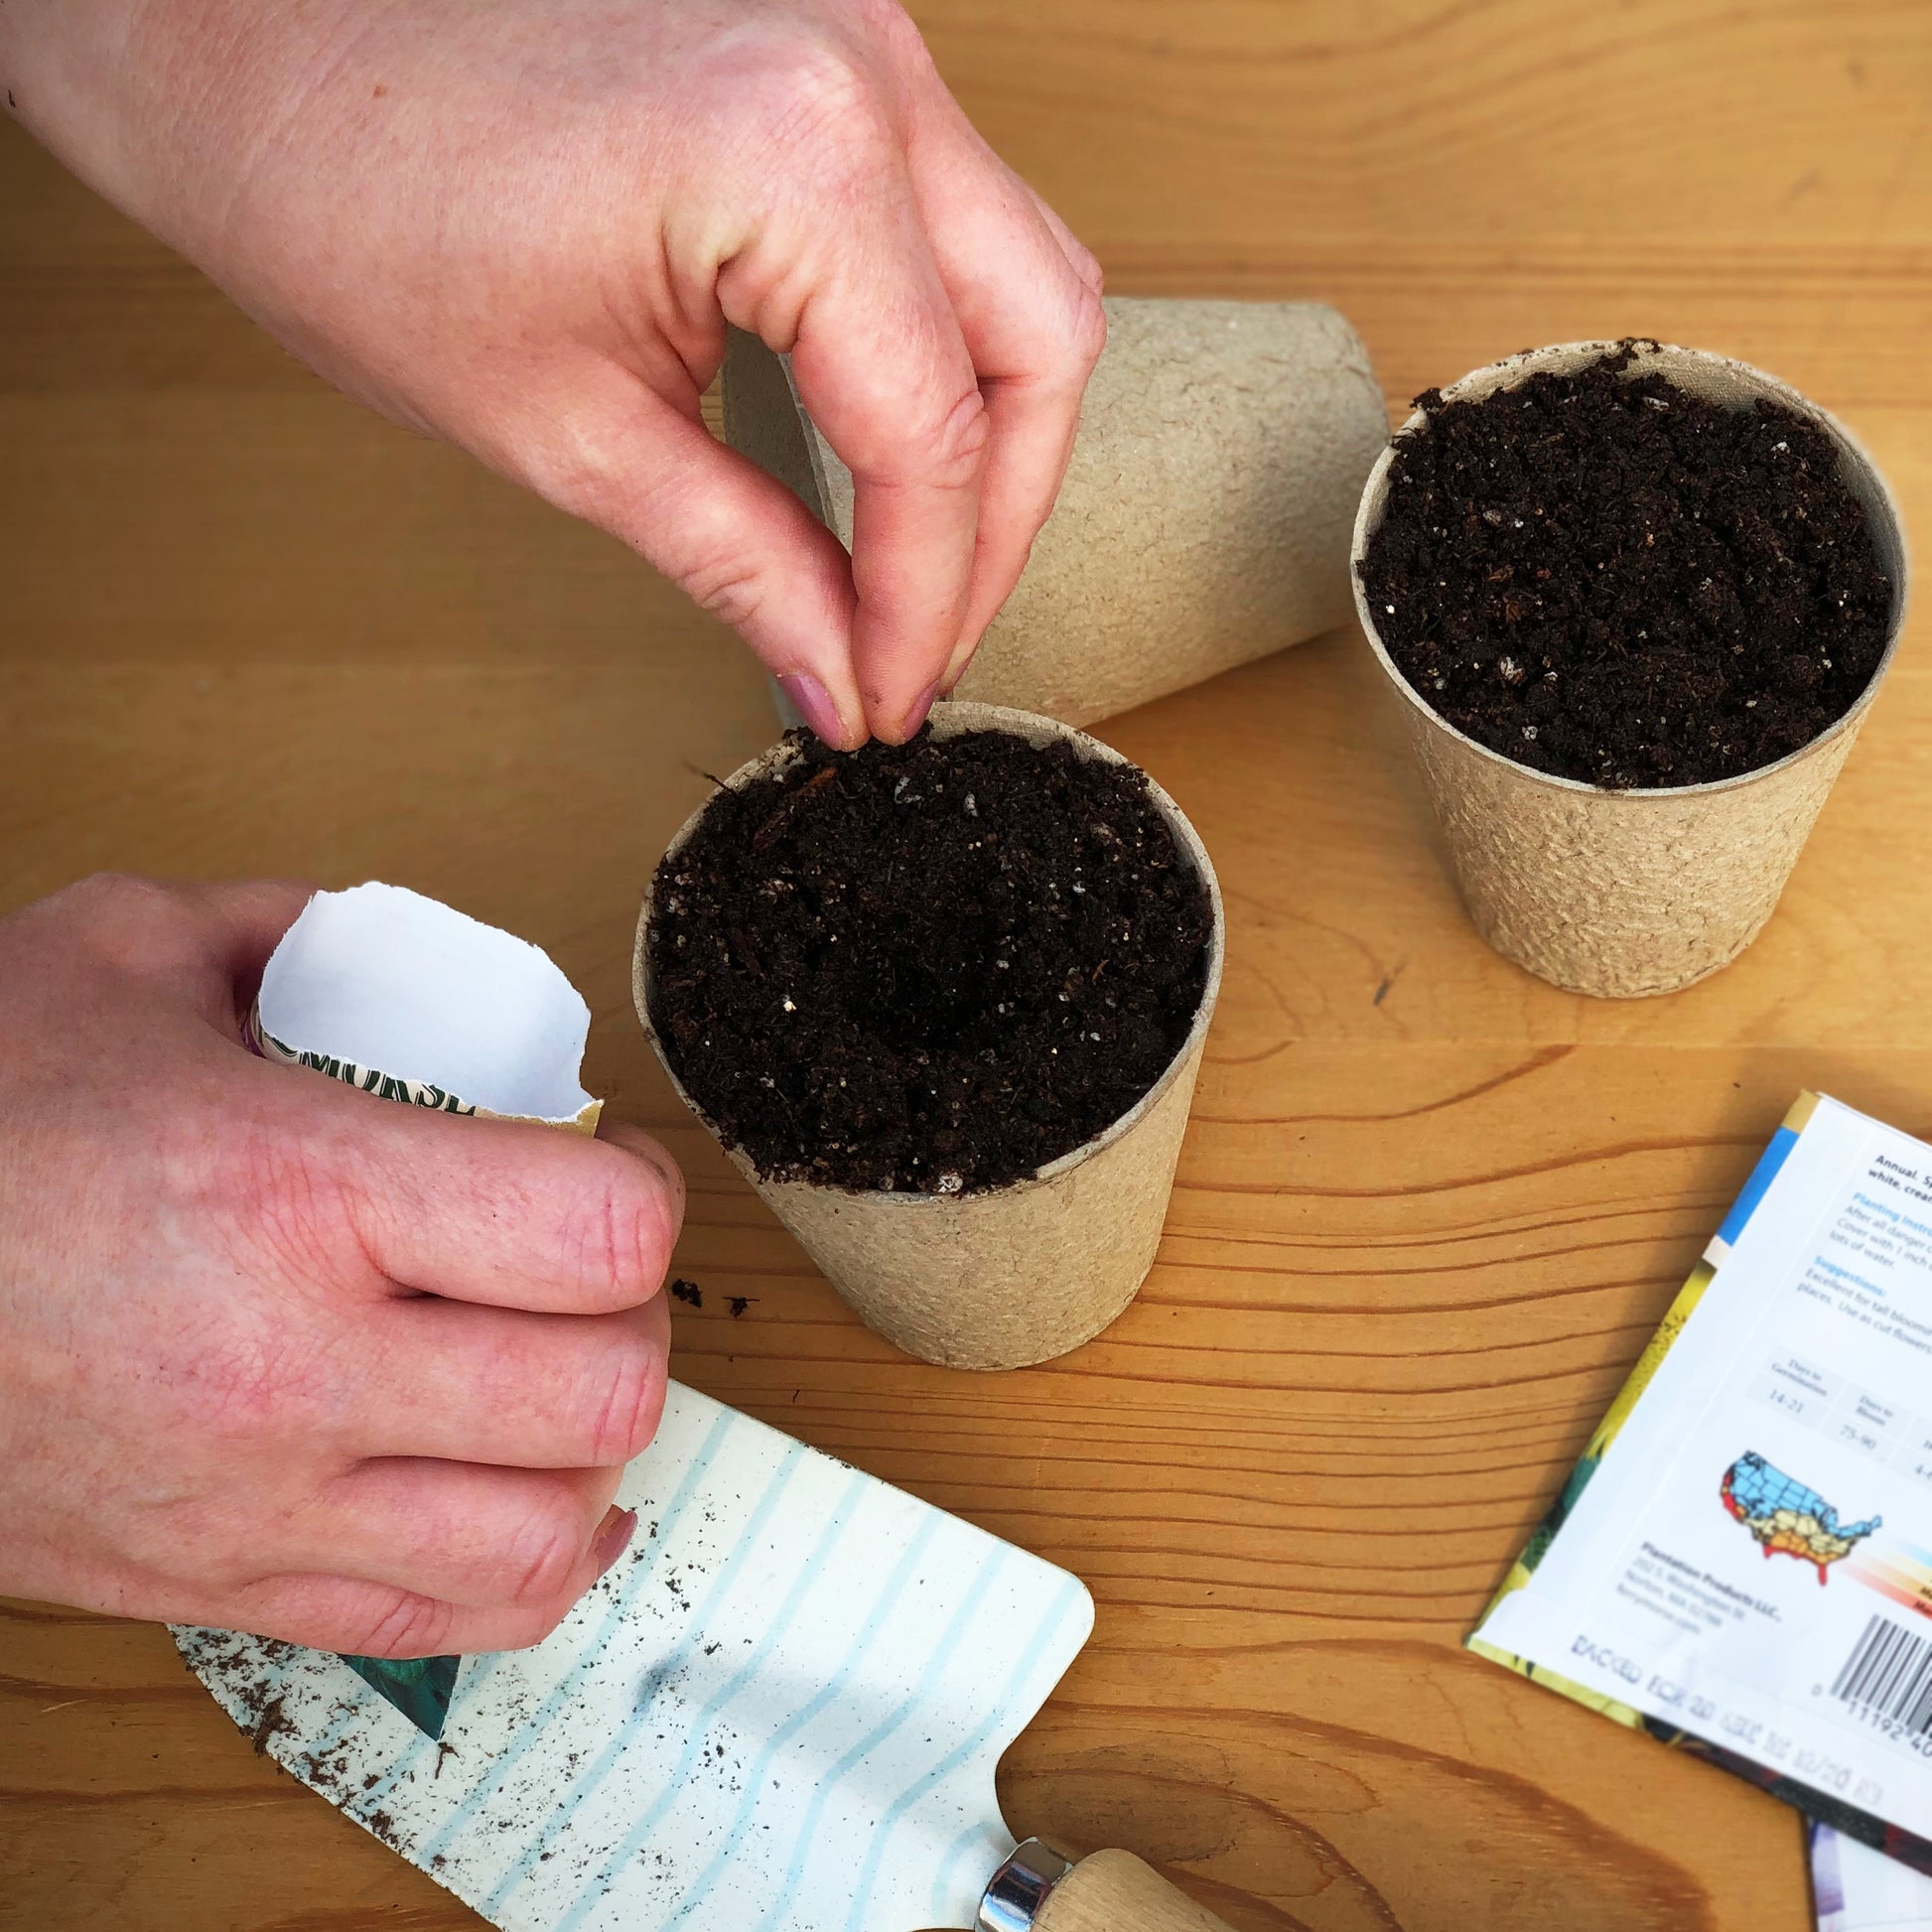 Start your Long Slim Organic Cayenne Pepper seeds in biodegradable peat or paper pots for easy transplanting.